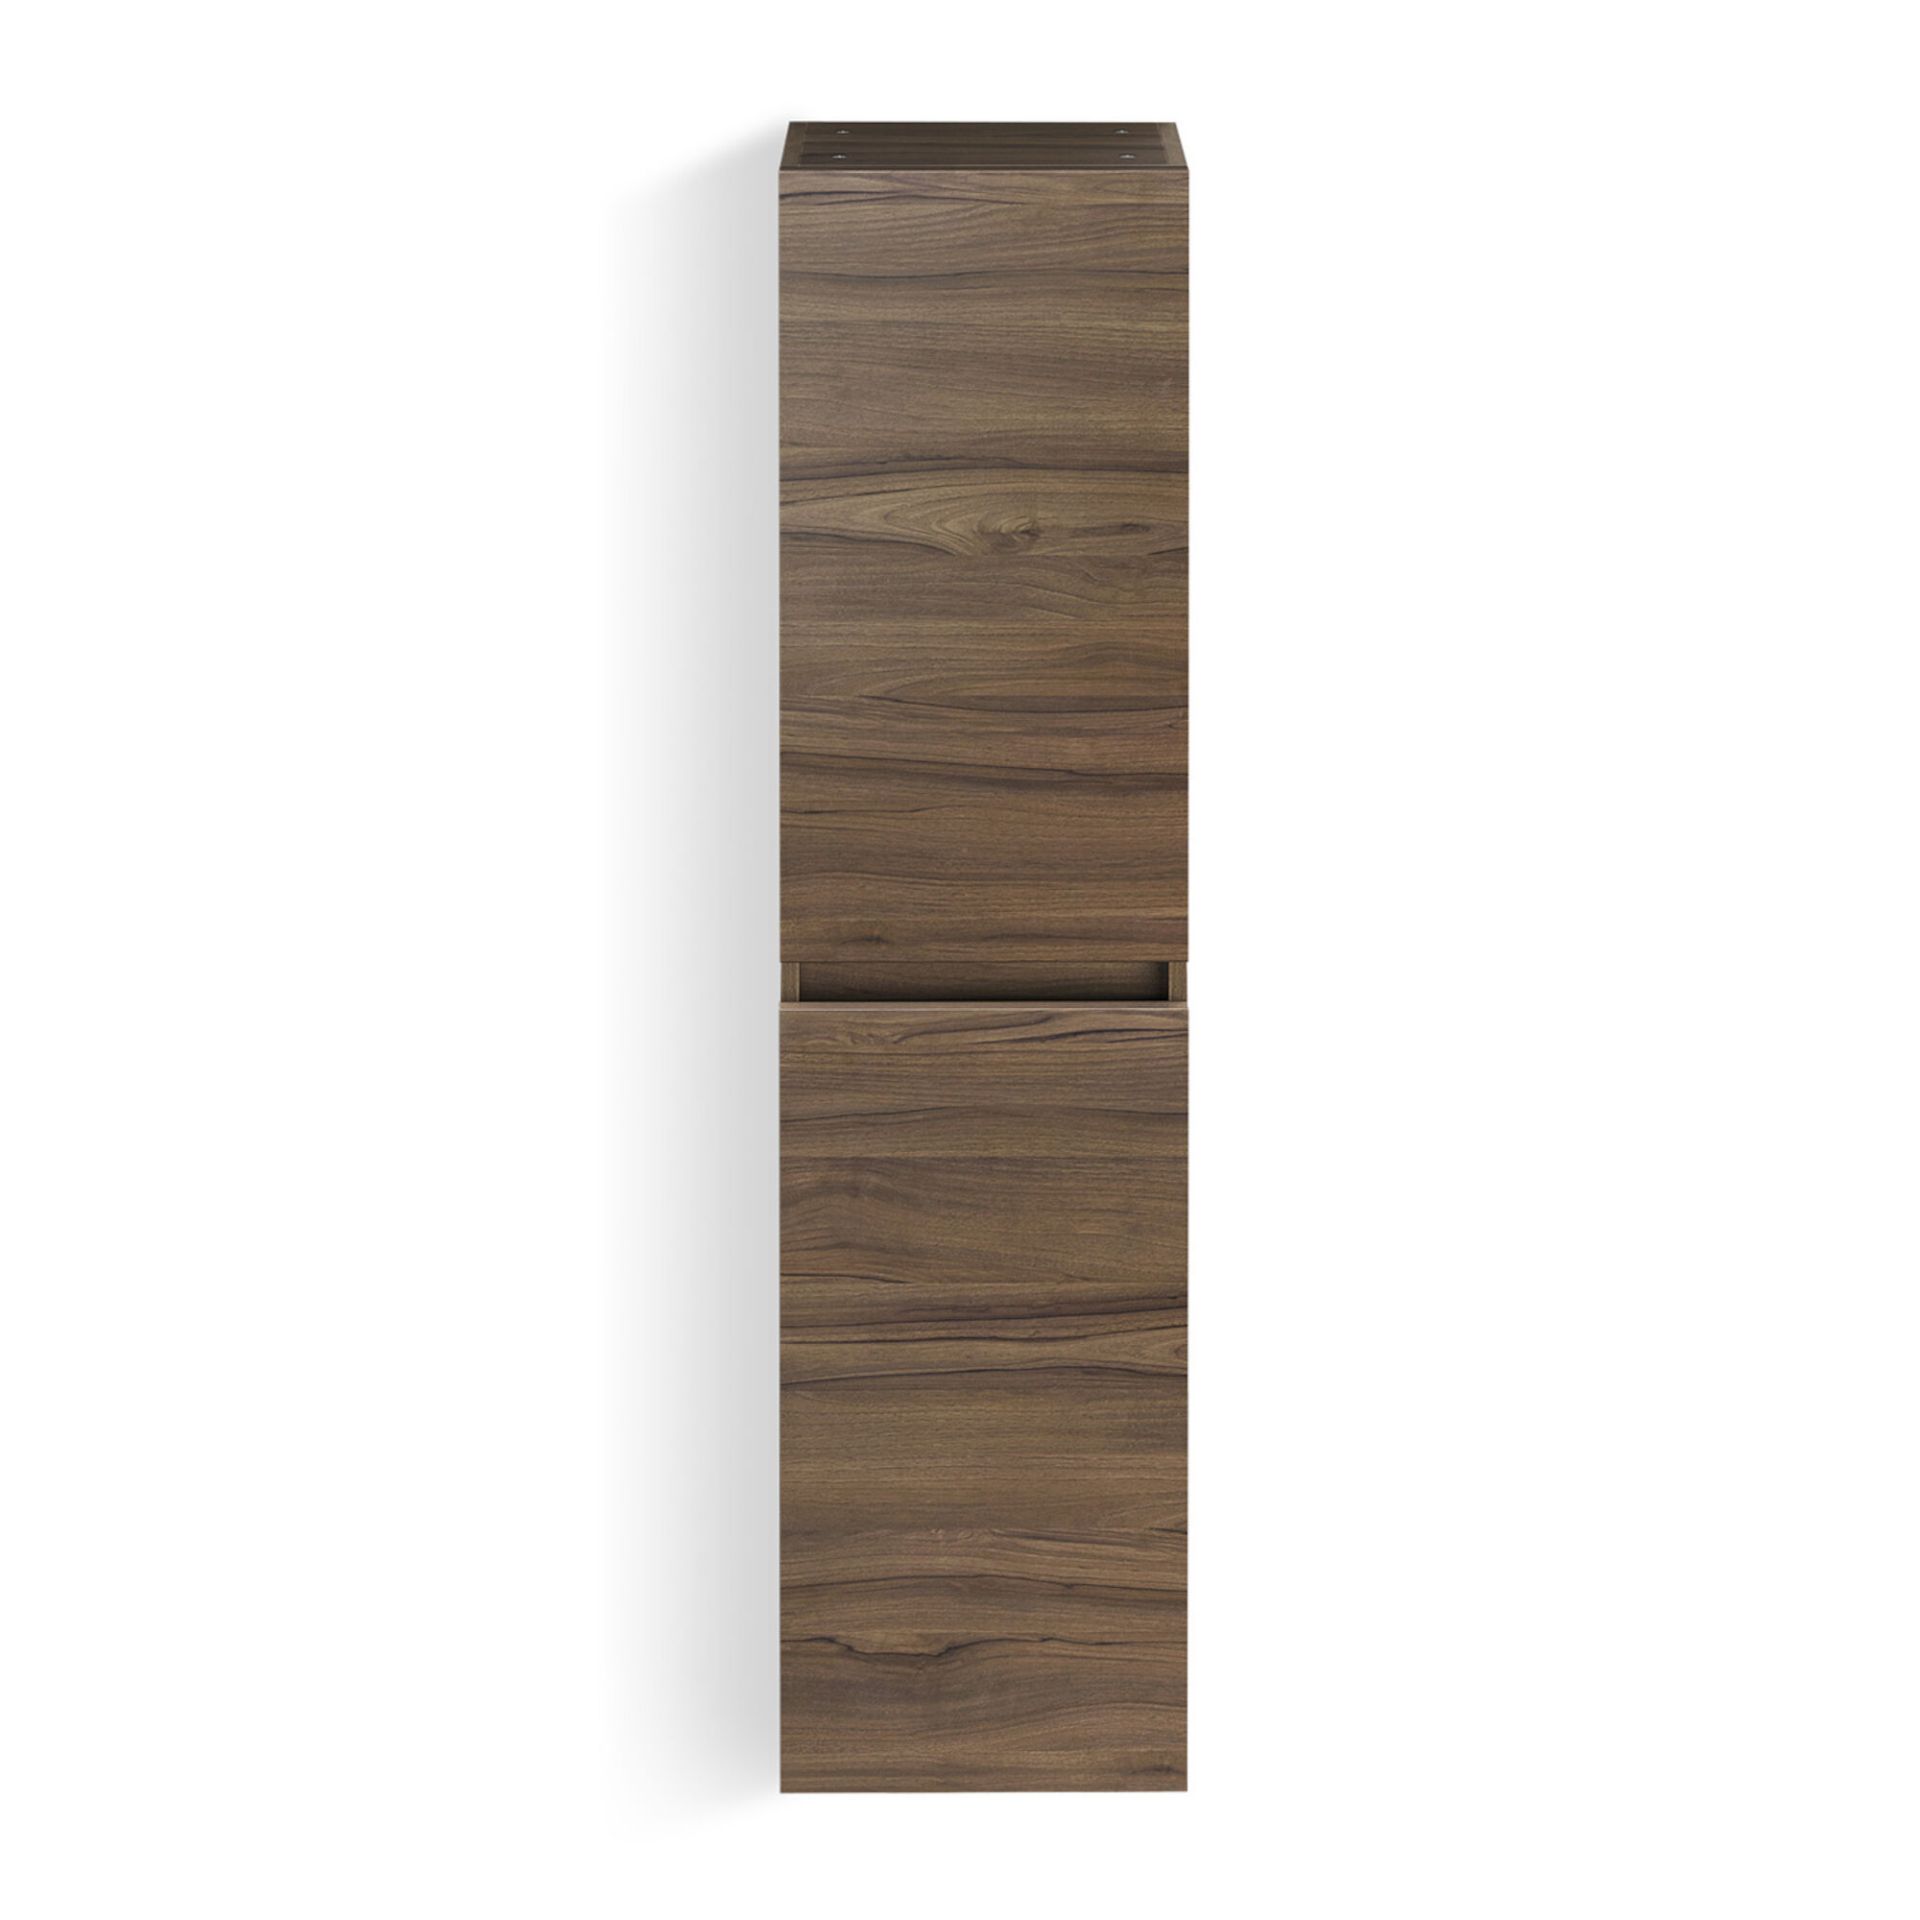 (KL18) Walnut Effect Wall Hung Tall Storage Cabinet. Great practical storage solution with - Image 2 of 3